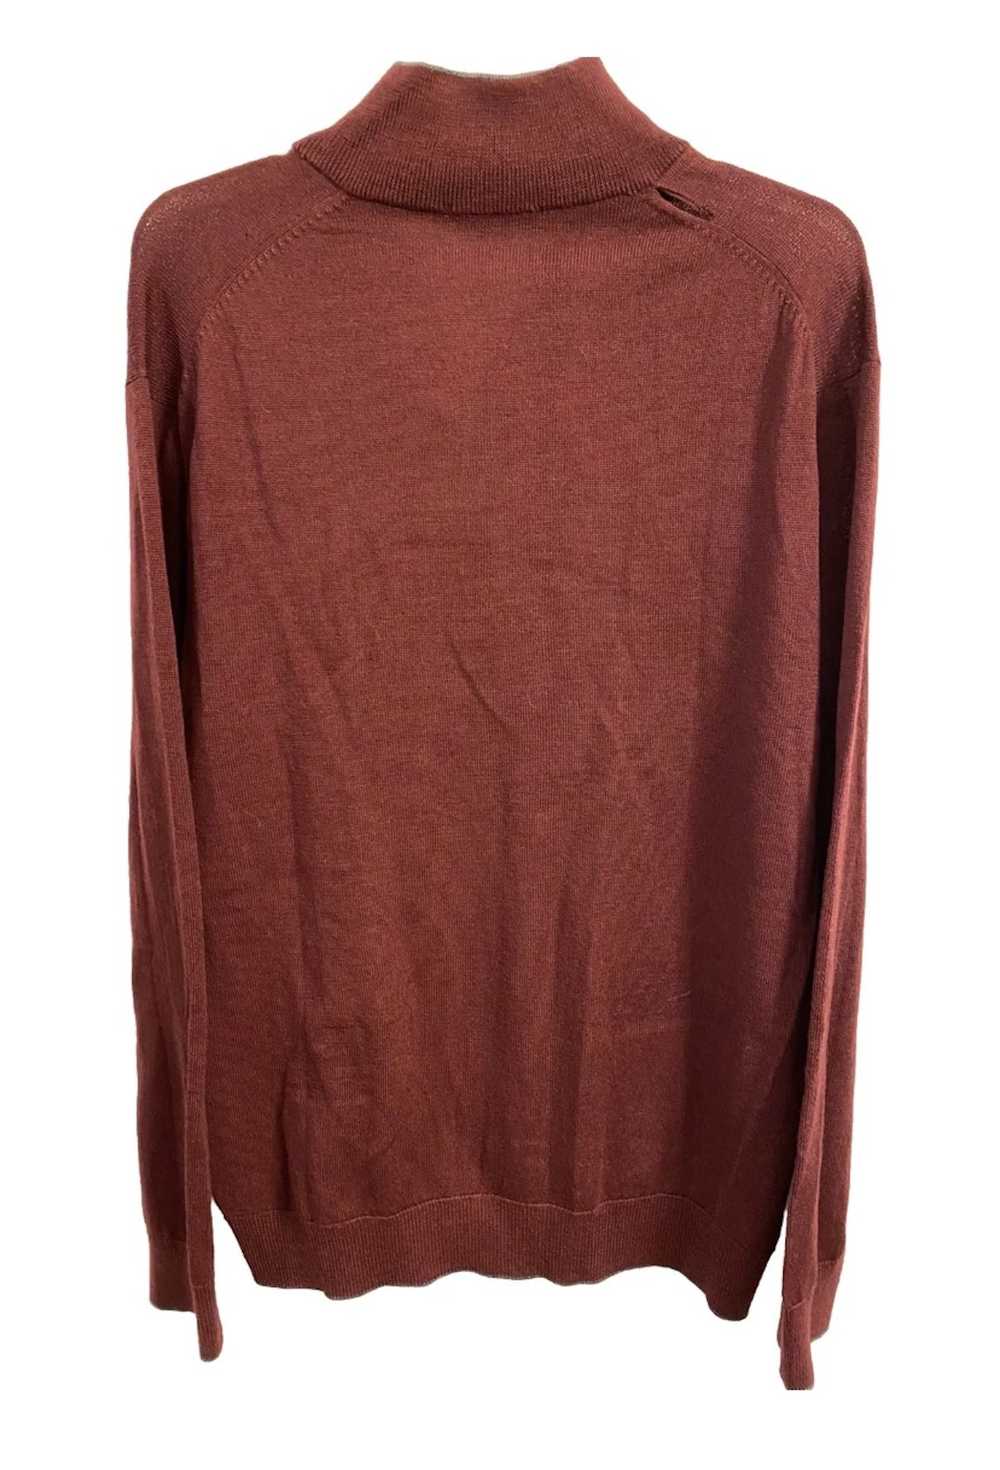 Other Raffi Sweater Mens Extra Large Maroon 100% … - image 2